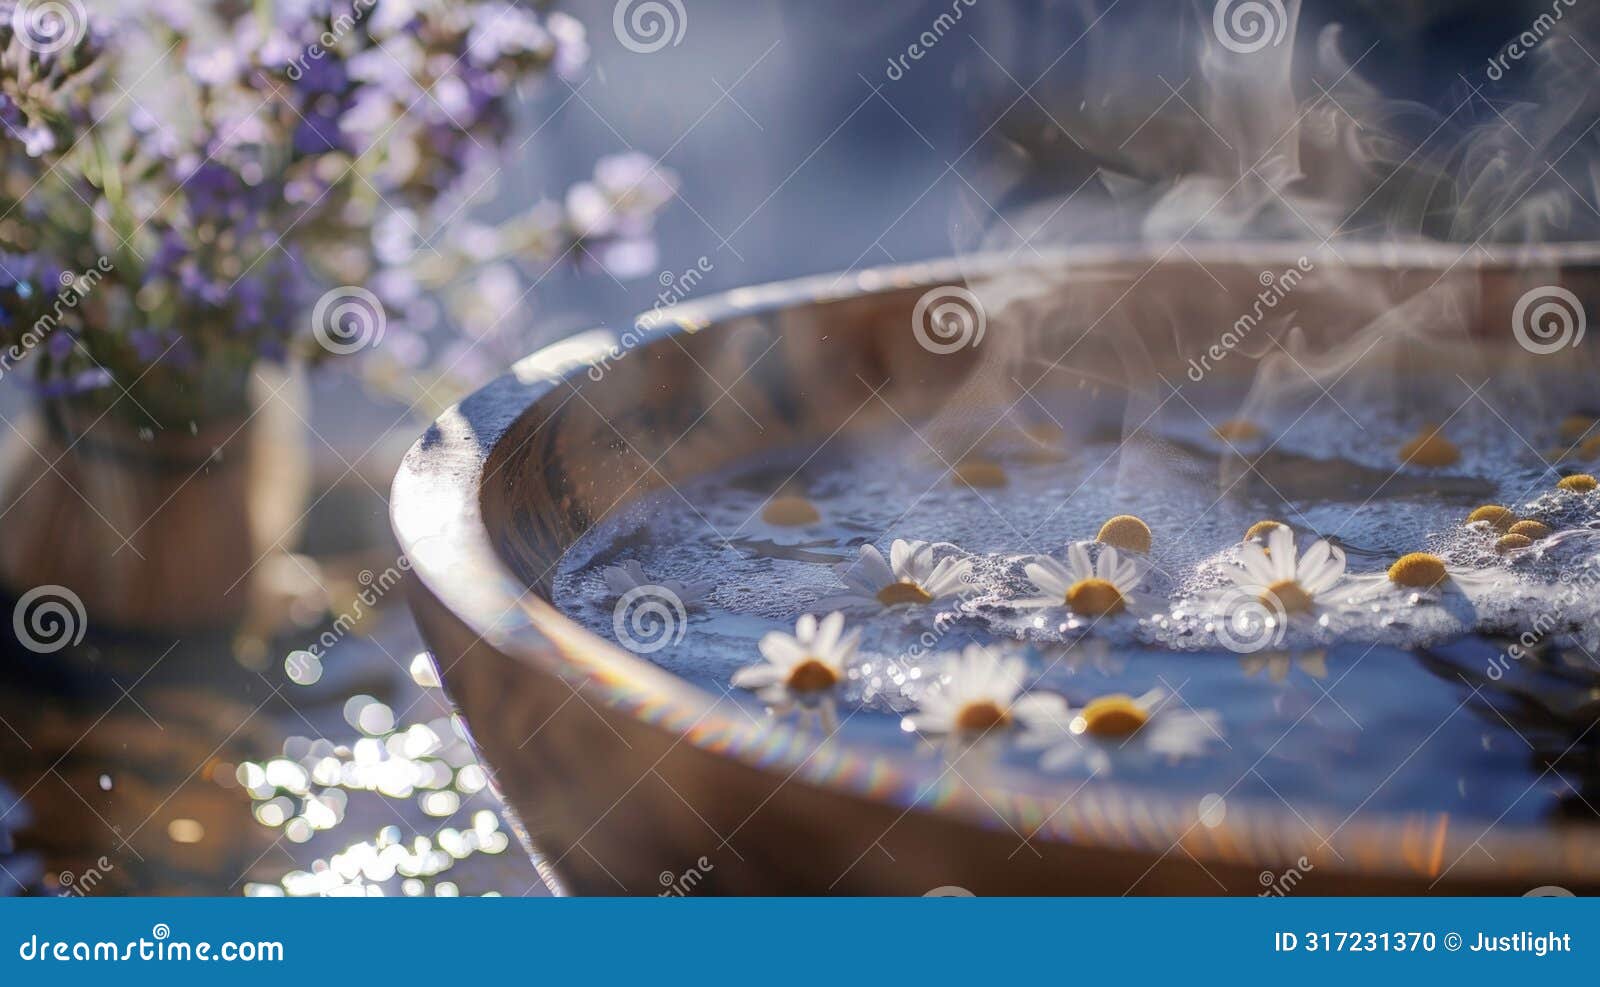 a facial steam bath infused with herbs like chamomile and lavender known in chinese medicine for their calming and